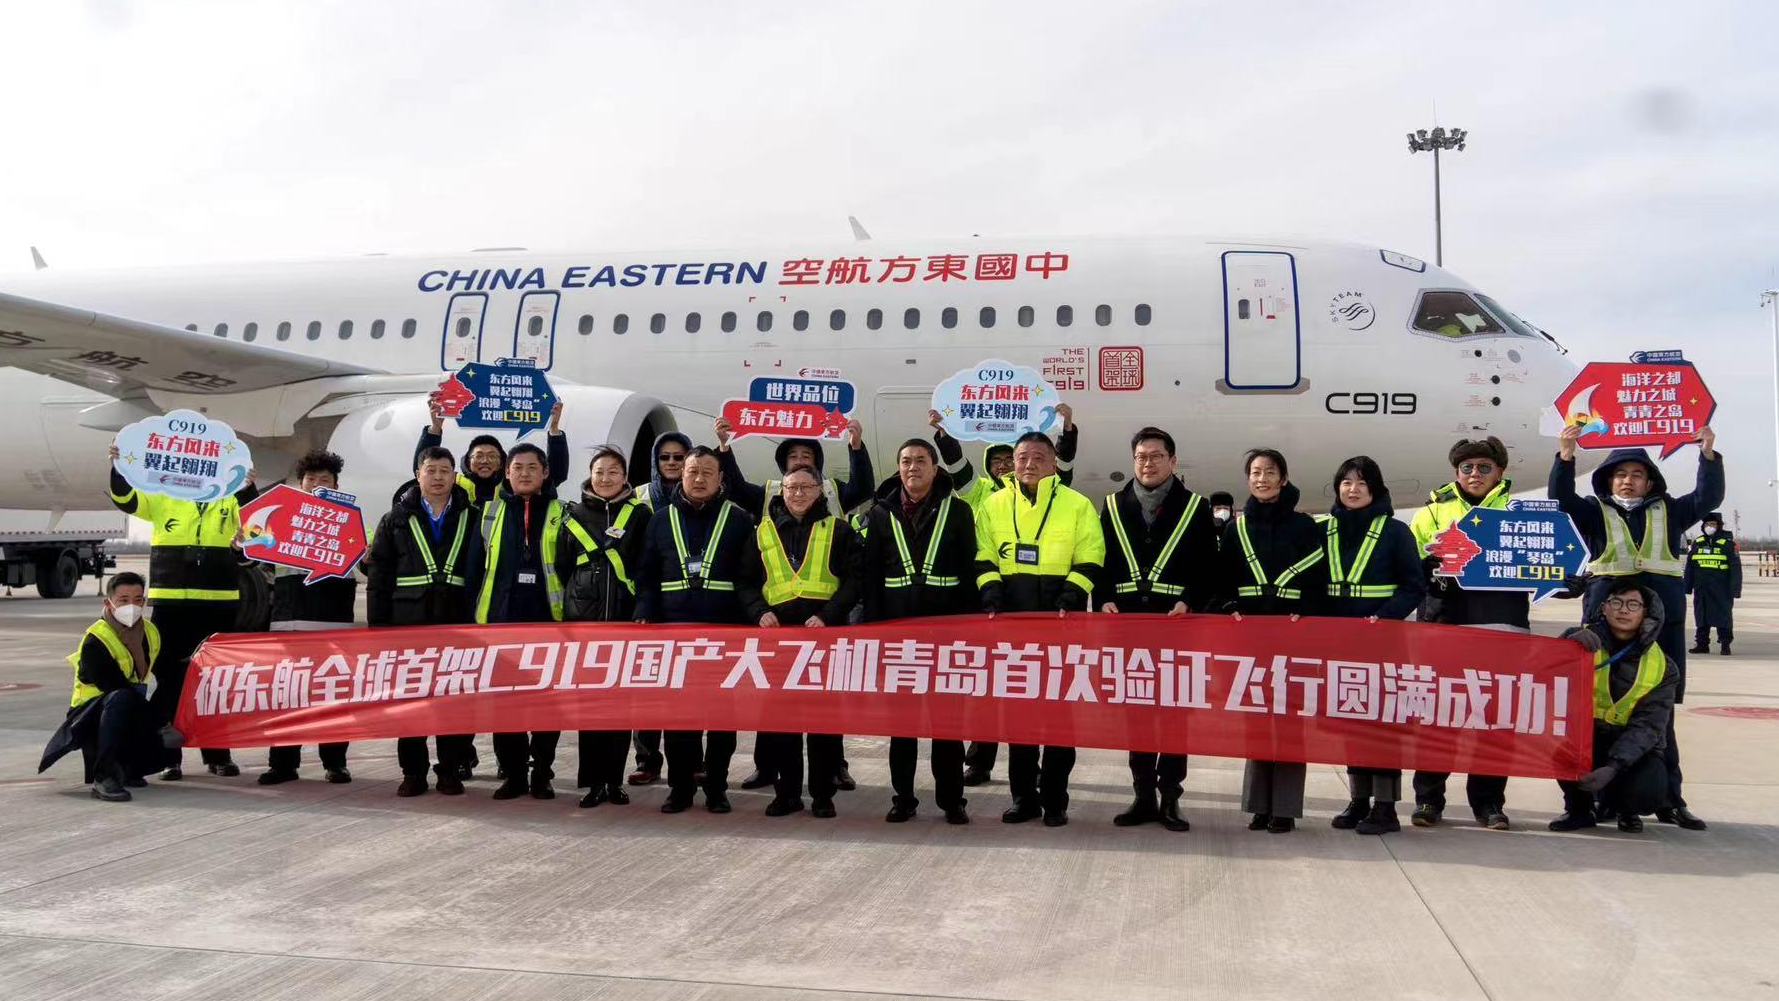 Staff members pose for a group photo after China's first China Eastern Airlines (CEA) C919 large passenger jet landed in Qingdao City in east China's Shandong Province, January 15, 2023. /China Media Group